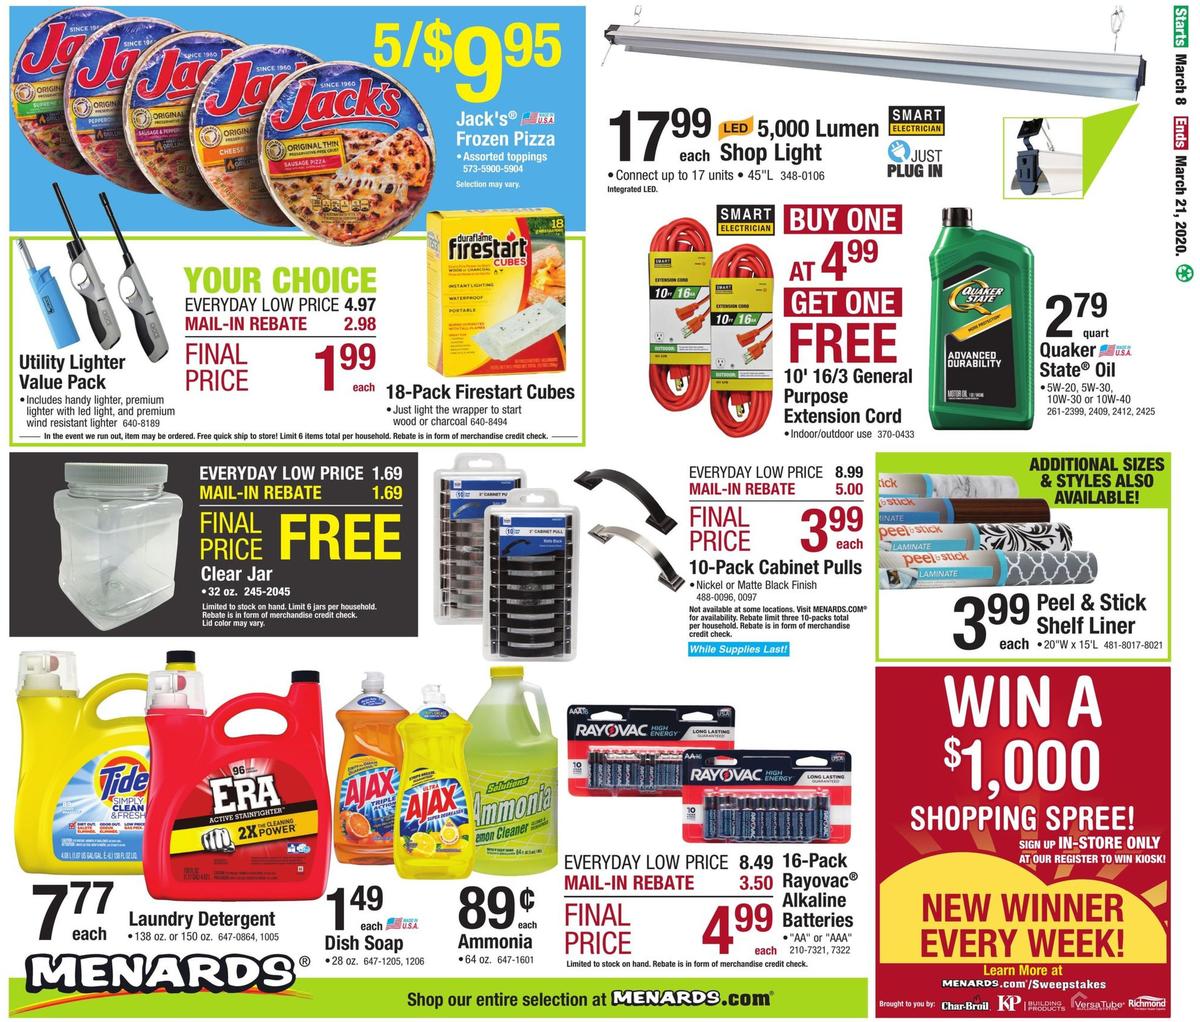 Menards Weekly Ads & Special Buys from March 8 - Page 47